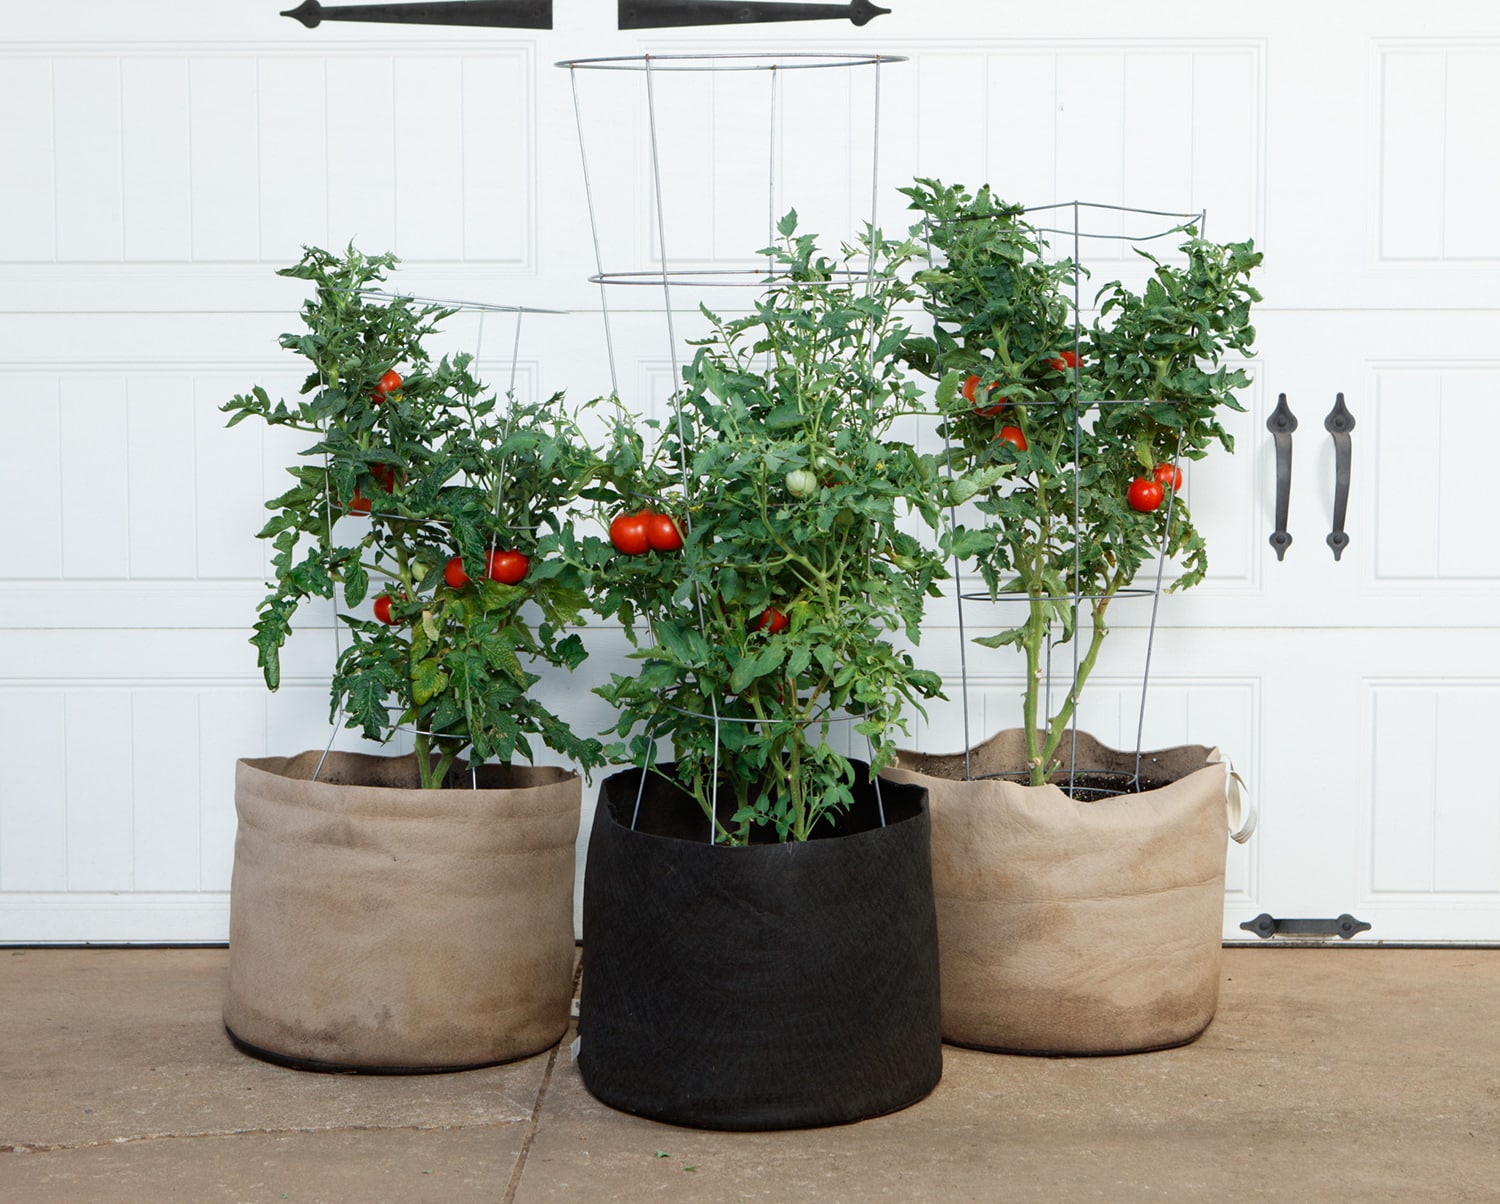 What plants grow well in a 1-gallon fabric pots?